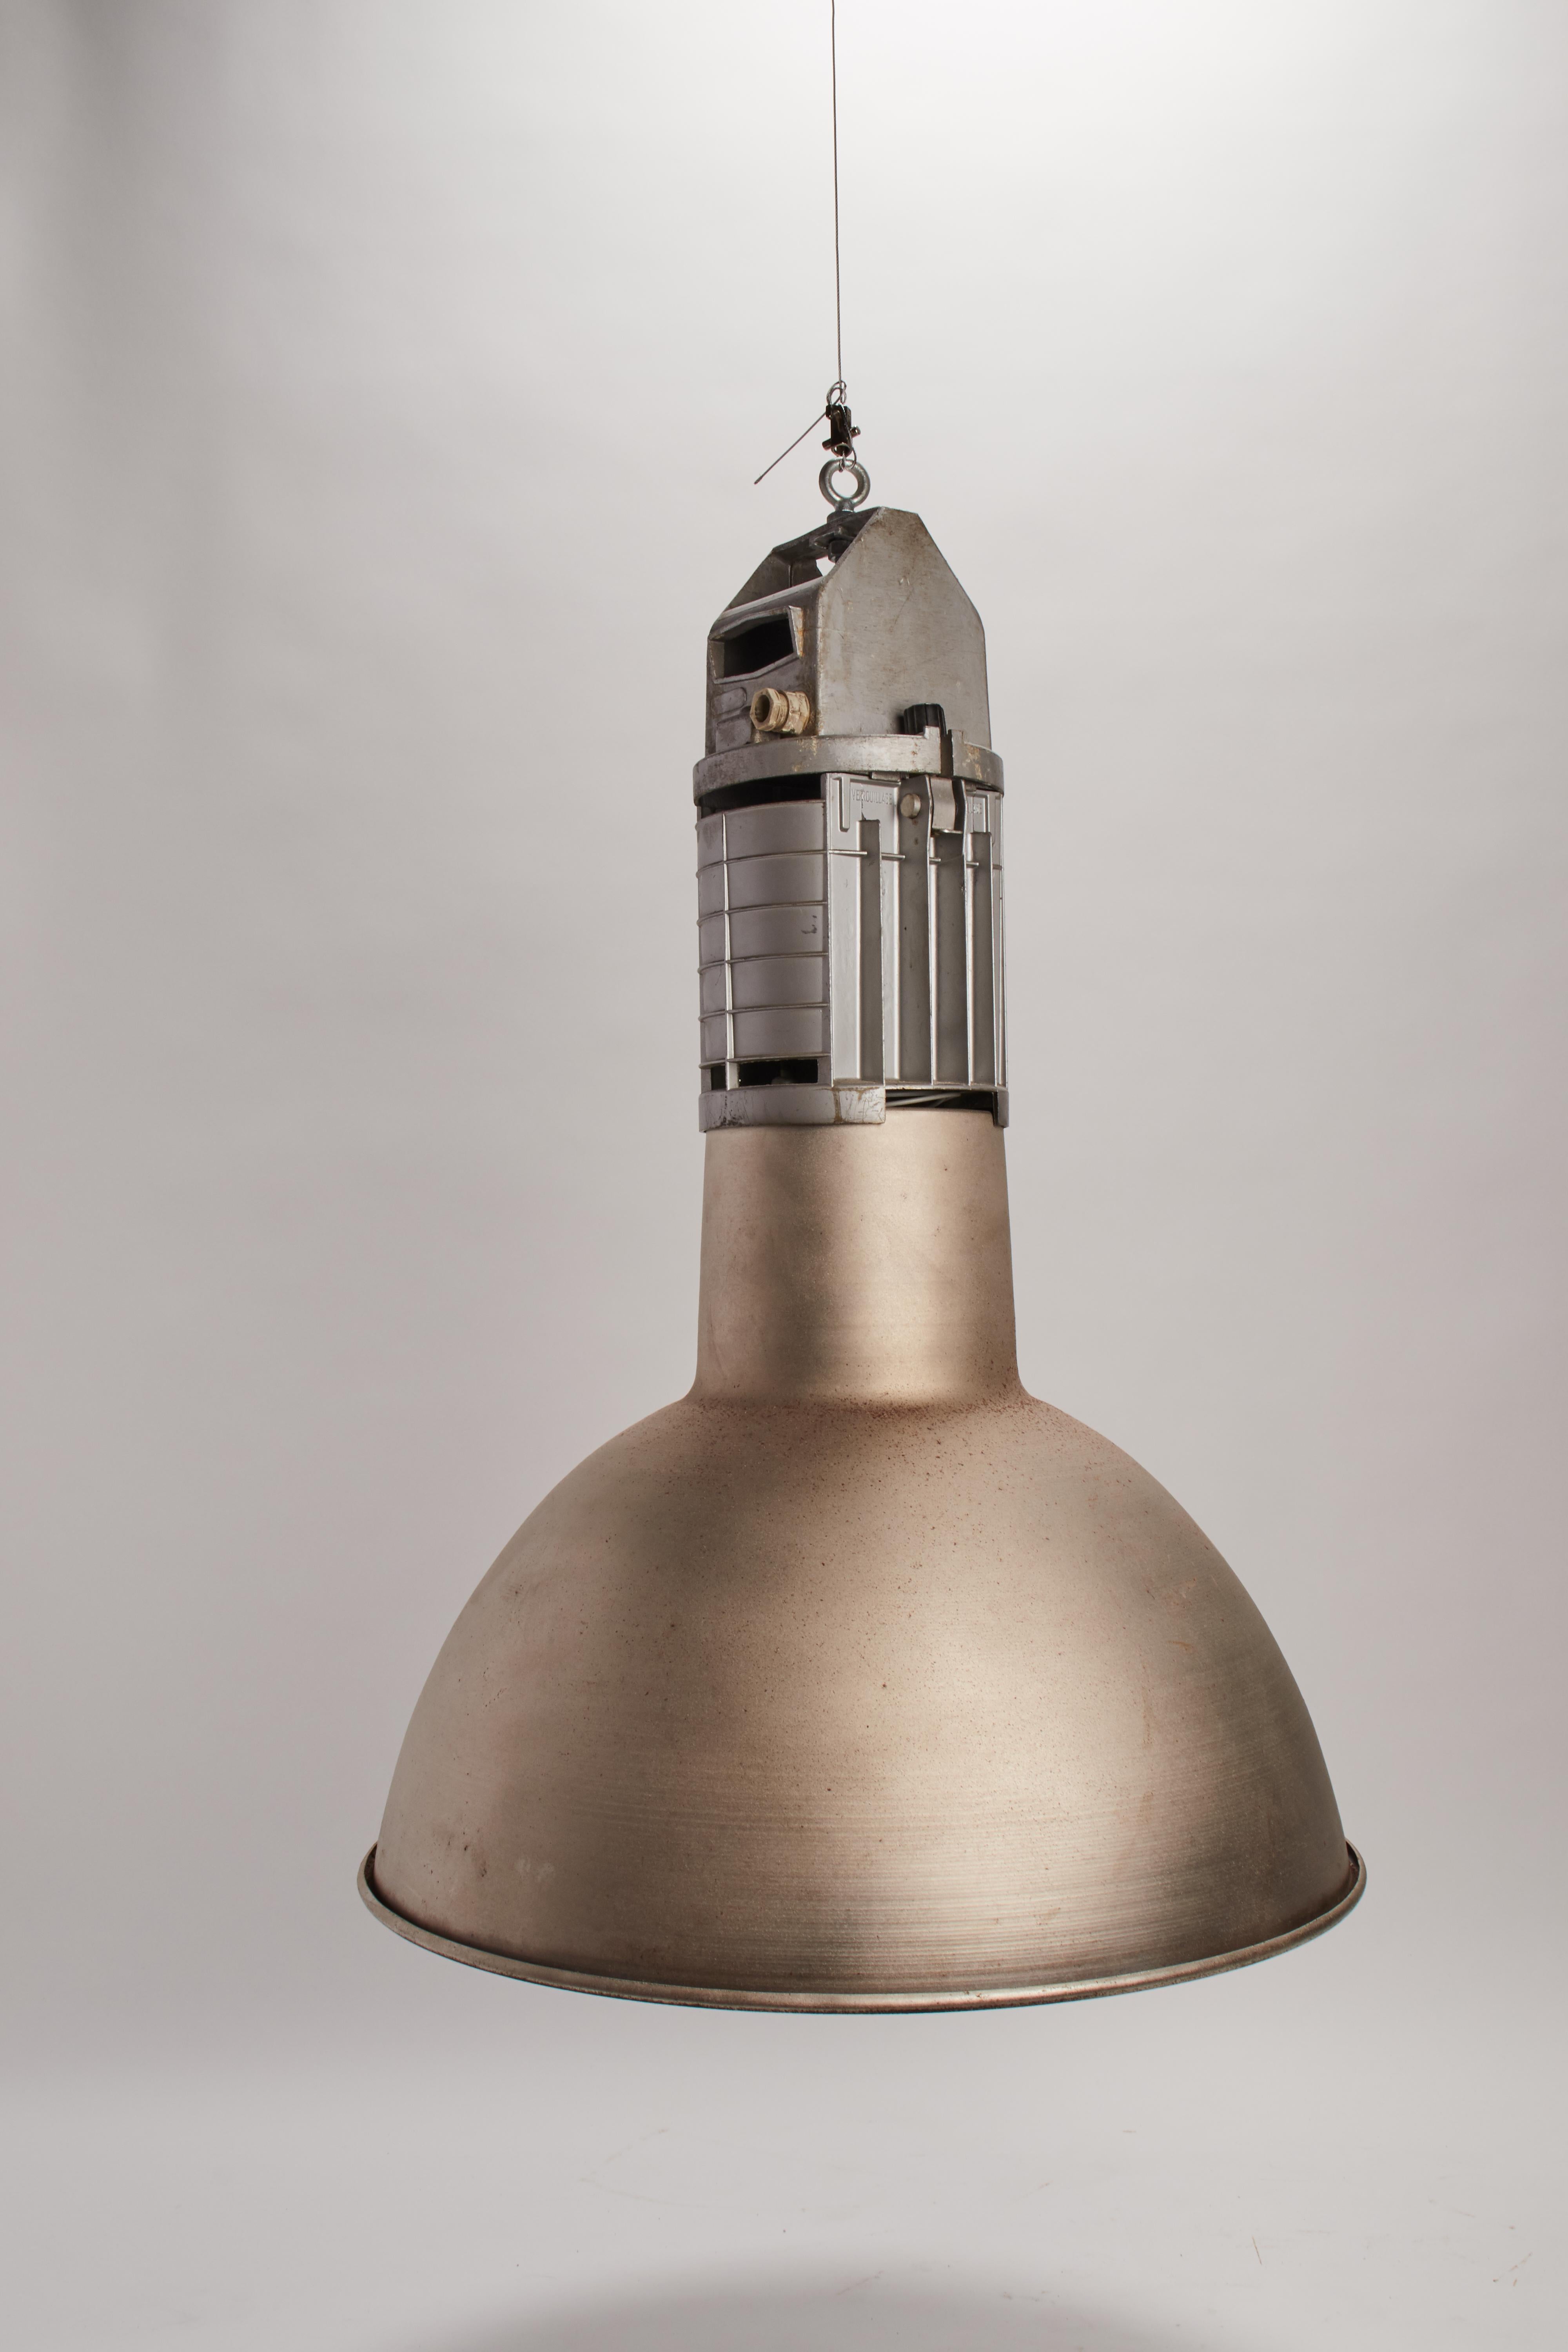 Industrial lamp with silver chrome enameled dome and aluminium reservoire for the voltage transformer. The lamp is been revired and ready for use. France 1930 ca.